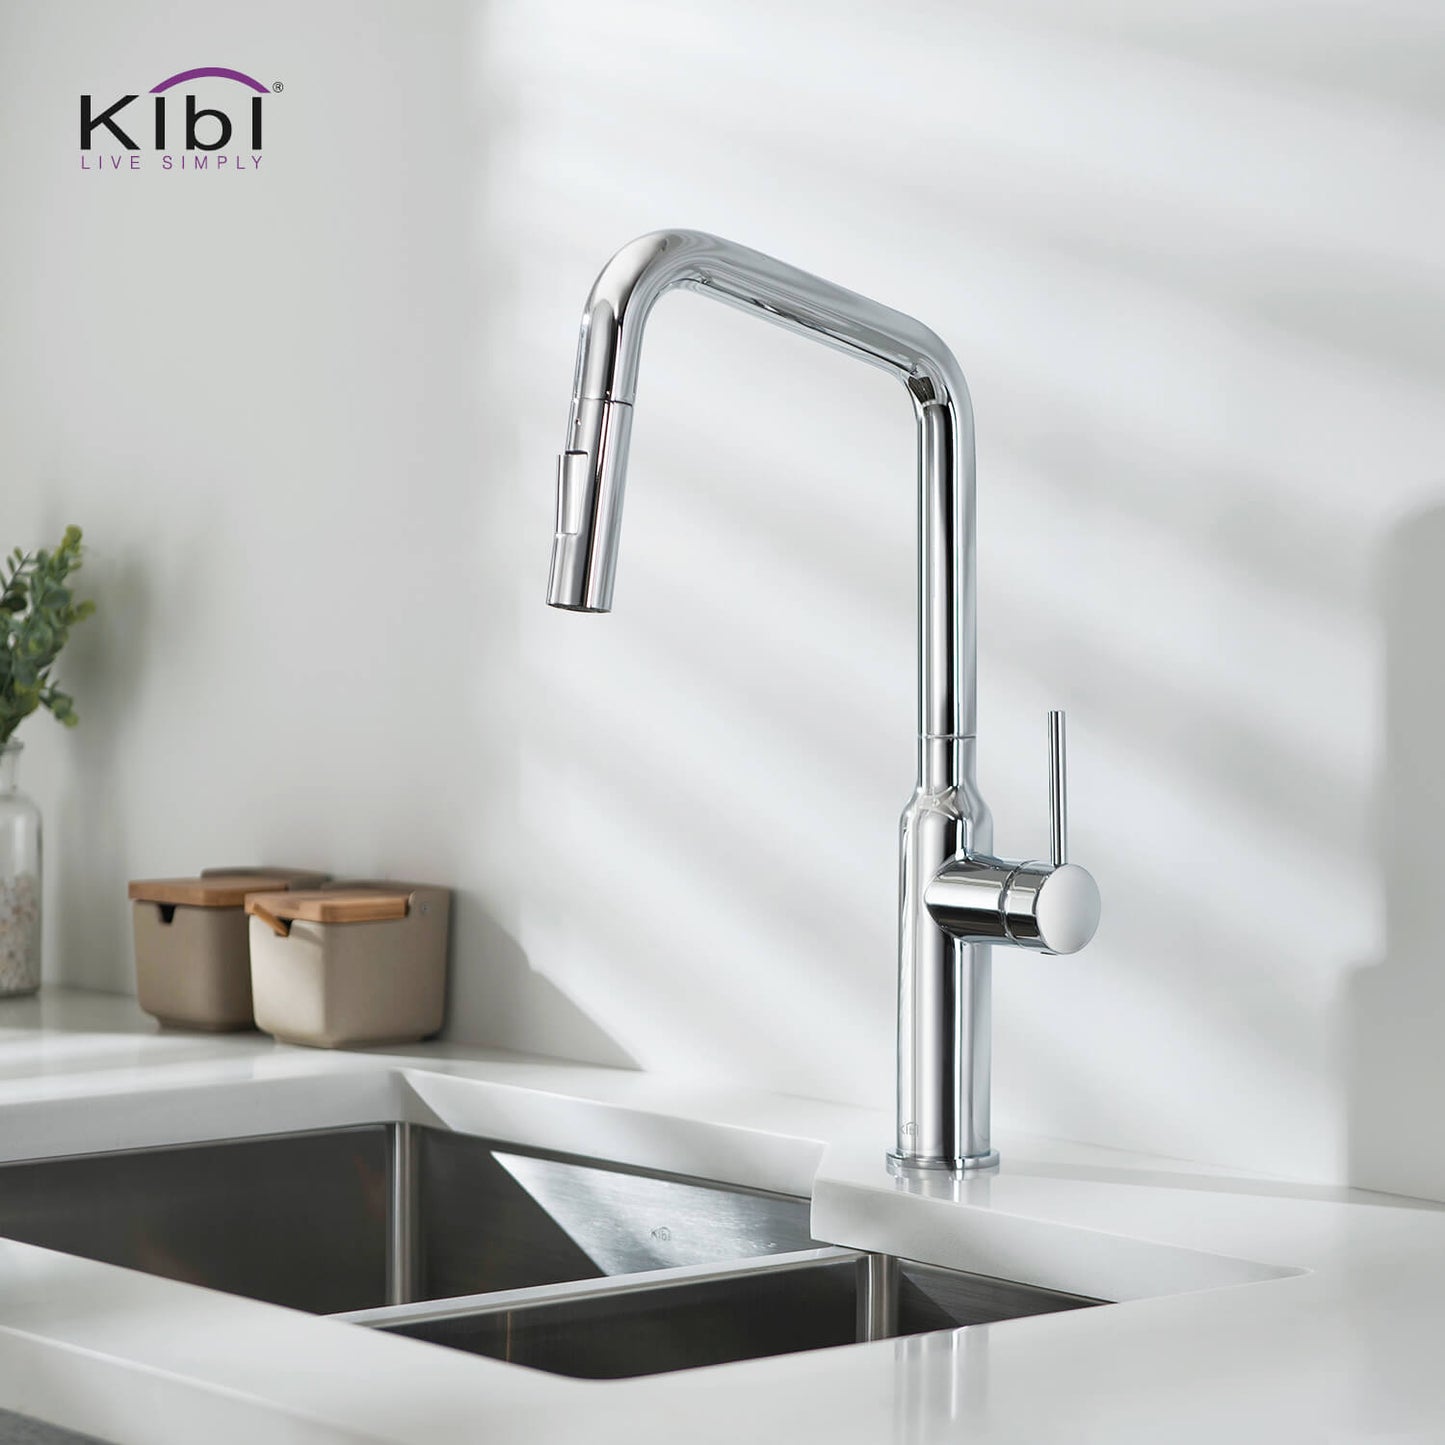 Kibi Macon Single Handle High Arc Pull Down Kitchen Faucet With Soap Dispenser in Chrome Finish